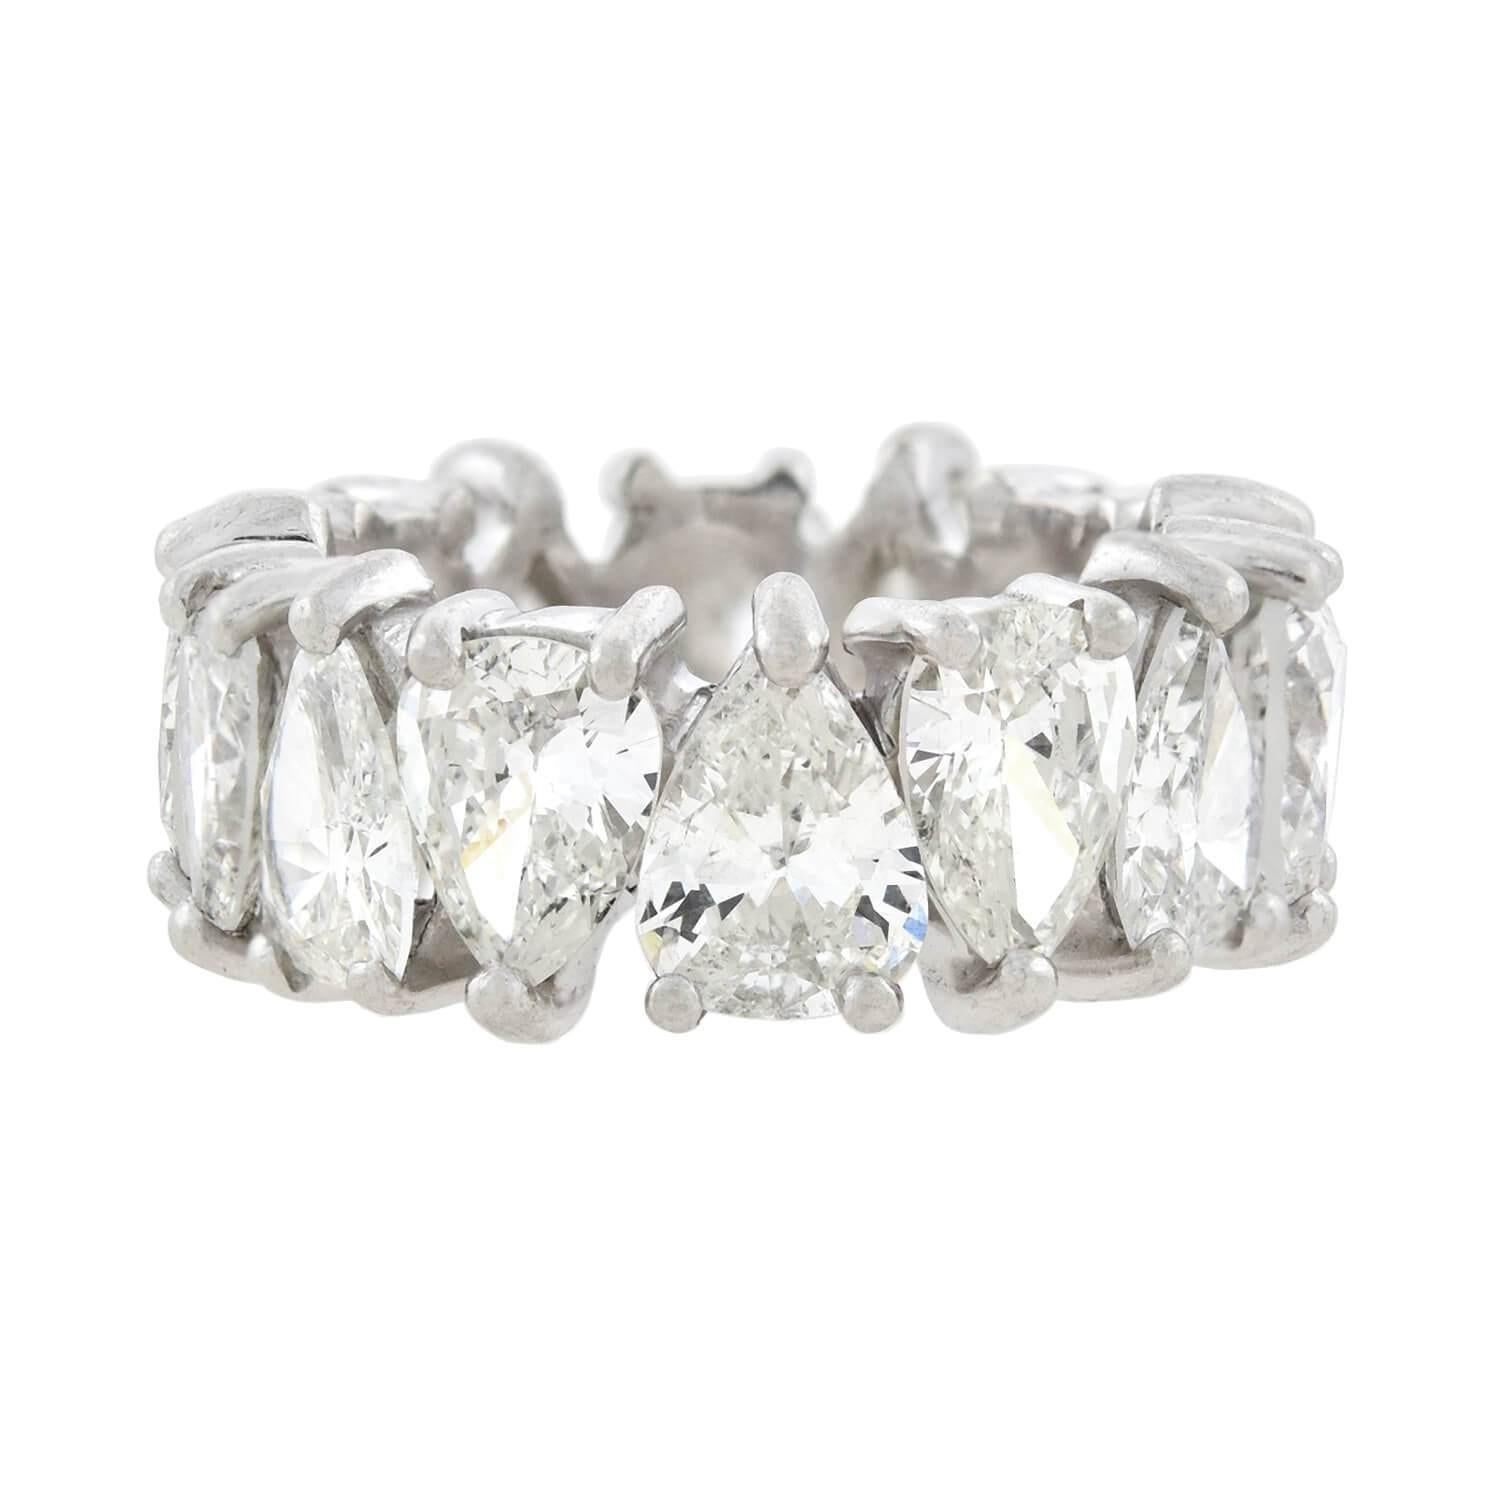 An absolutely fabulous Vintage eternity band from the 1960s era! Crafted in platinum, this unusual and gorgeous ring features fourteen pear-shaped Brilliant Cut diamonds which alternate in direction as they encircle the entire length of the band.